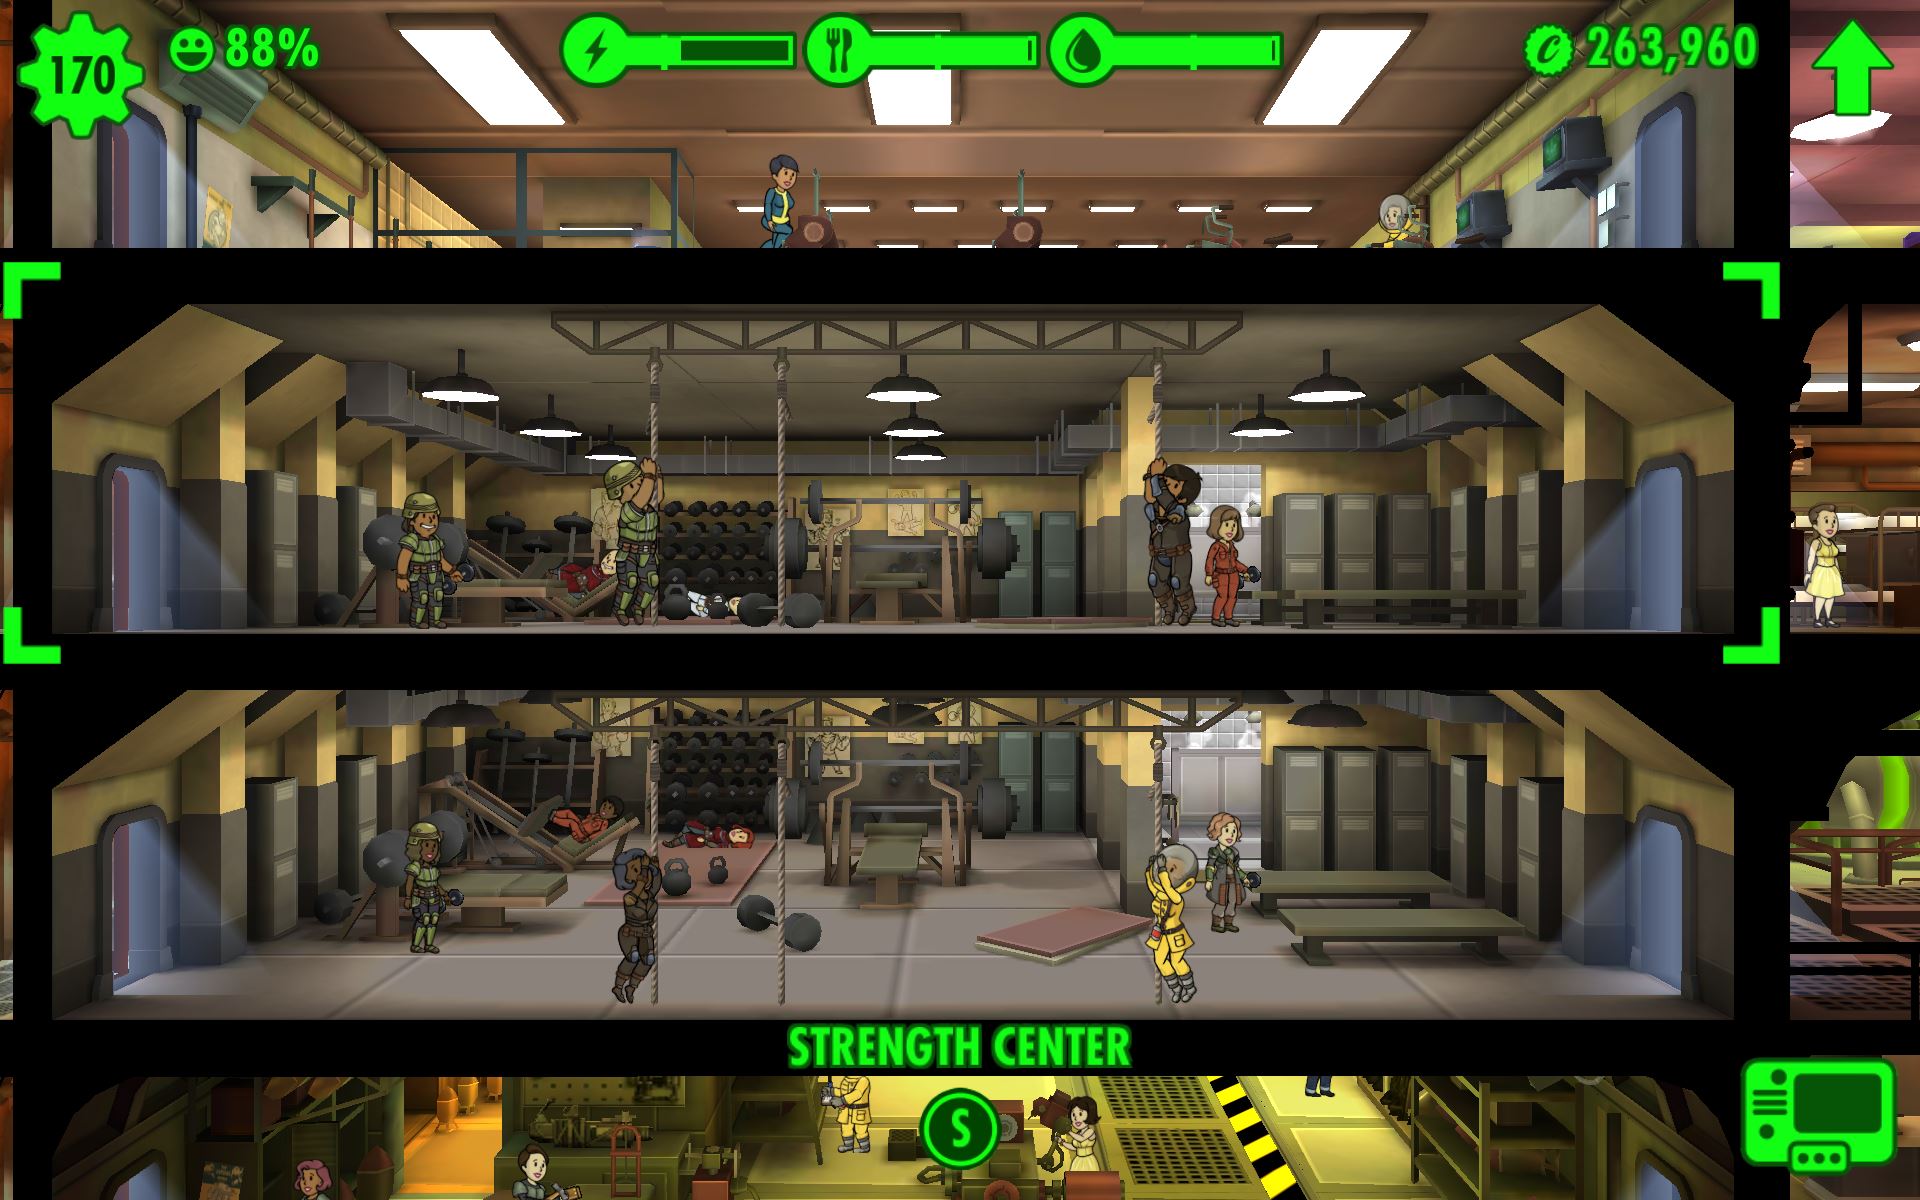 fallout shelter weight room